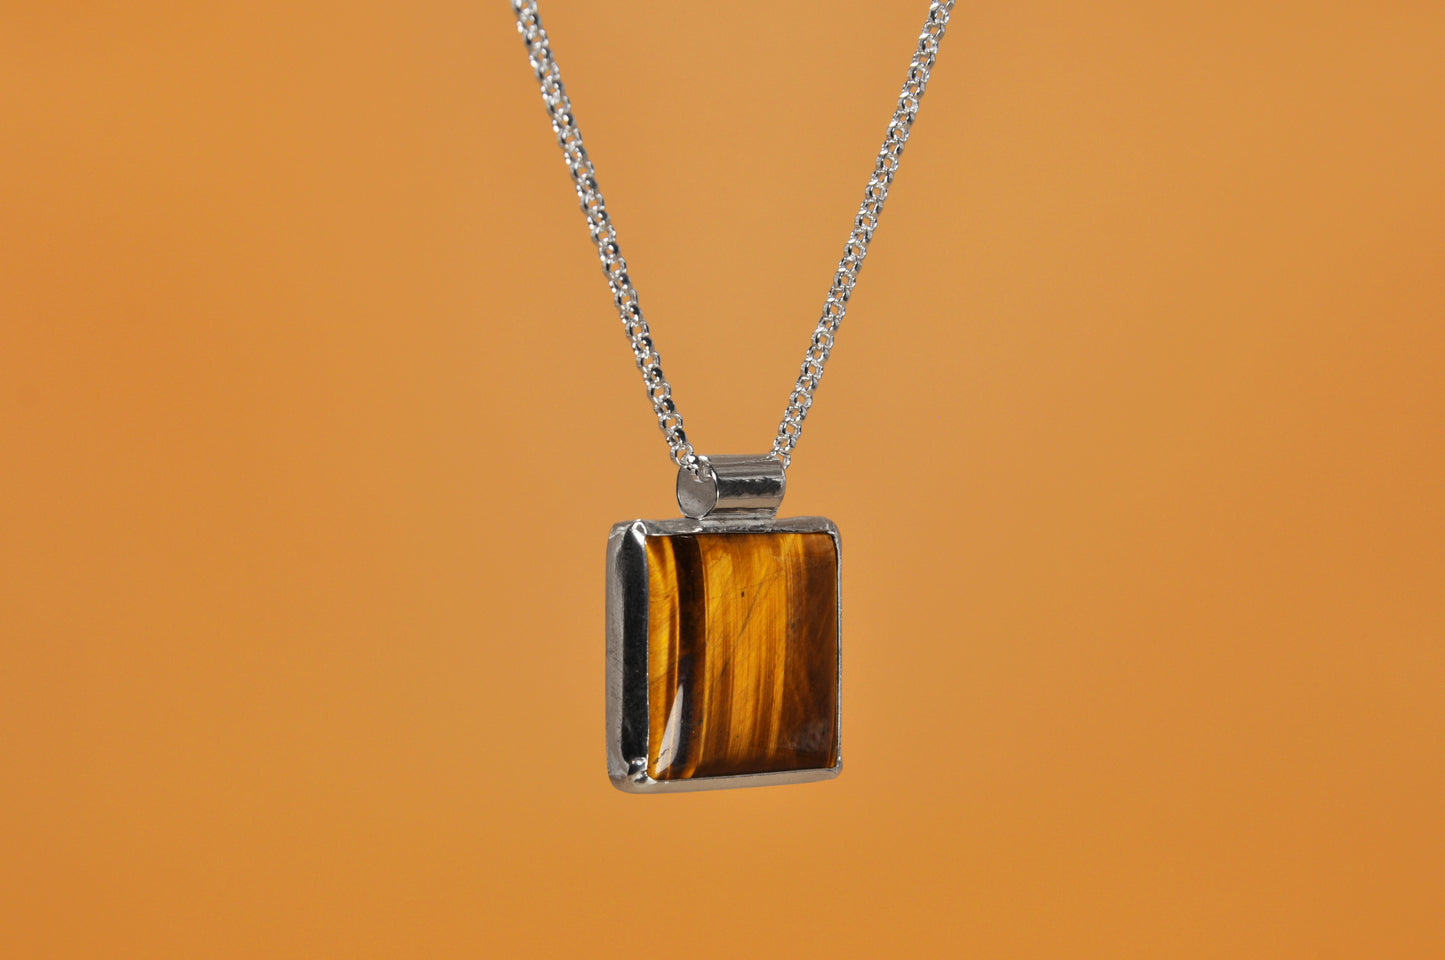 Tiger's Eye Square Sterling Silver Pendant Necklace